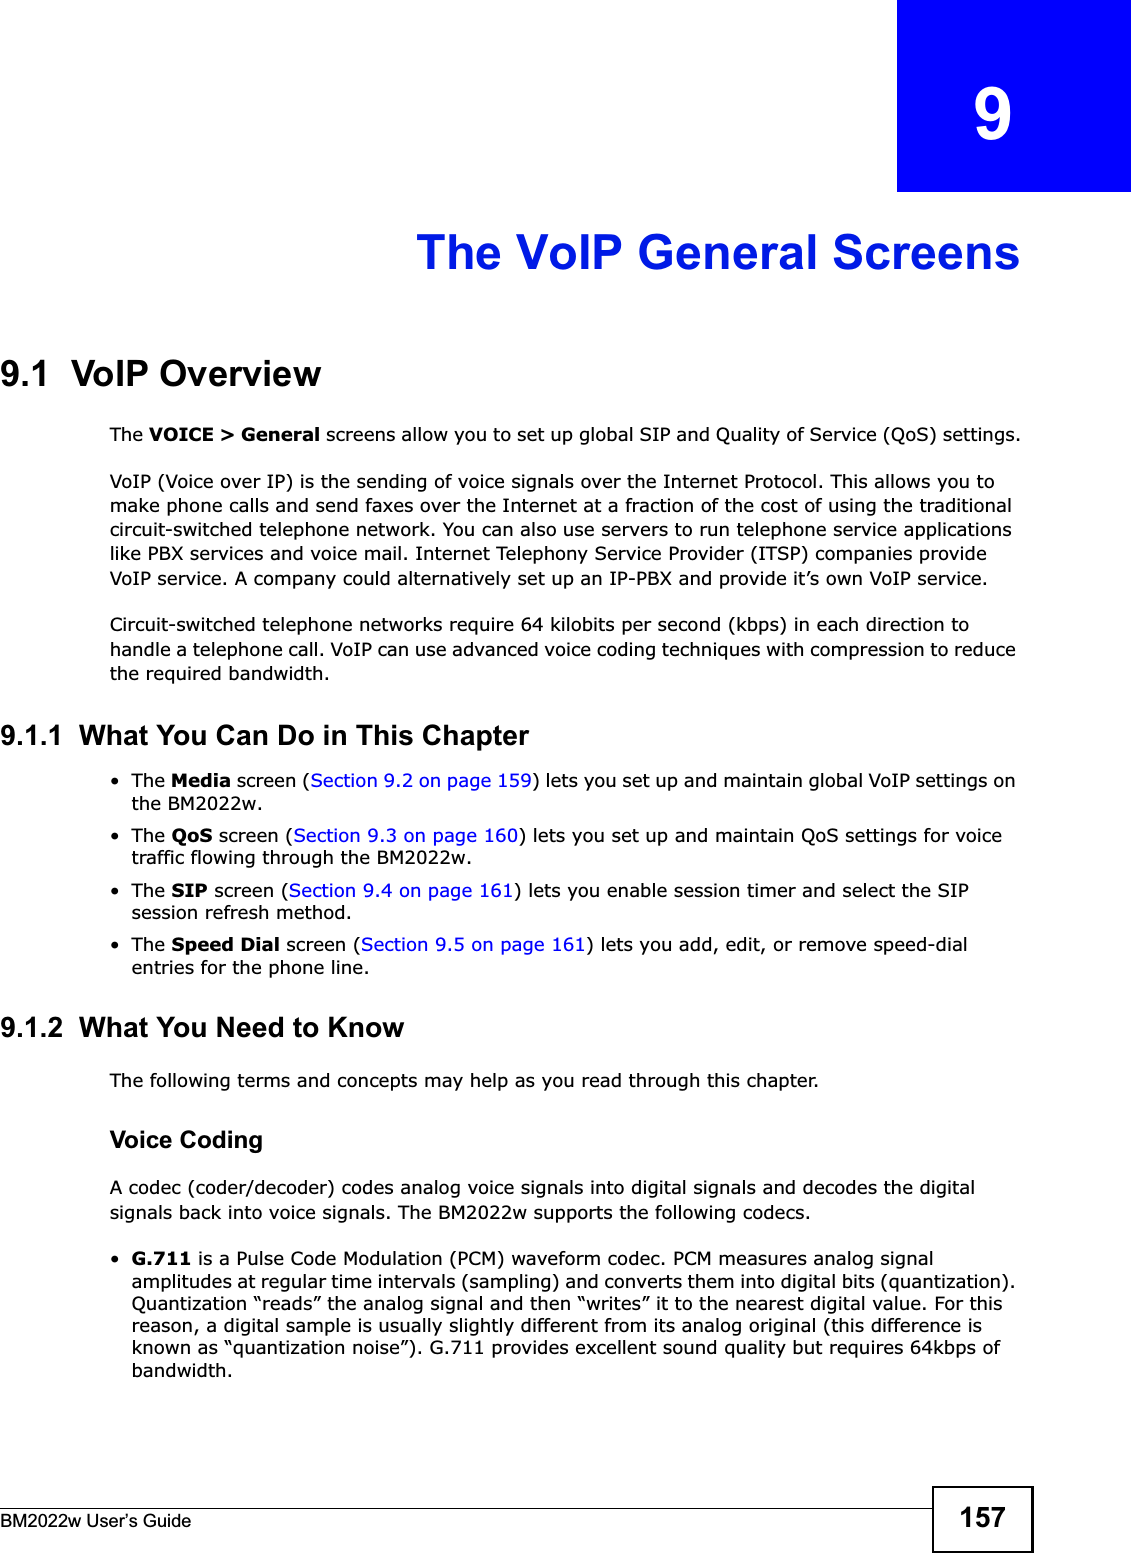 BM2022w User’s Guide 157CHAPTER   9The VoIP General Screens9.1  VoIP OverviewThe VOICE &gt; General screens allow you to set up global SIP and Quality of Service (QoS) settings.VoIP (Voice over IP) is the sending of voice signals over the Internet Protocol. This allows you to make phone calls and send faxes over the Internet at a fraction of the cost of using the traditional circuit-switched telephone network. You can also use servers to run telephone service applications like PBX services and voice mail. Internet Telephony Service Provider (ITSP) companies provide VoIP service. A company could alternatively set up an IP-PBX and provide it’s own VoIP service.Circuit-switched telephone networks require 64 kilobits per second (kbps) in each direction to handle a telephone call. VoIP can use advanced voice coding techniques with compression to reduce the required bandwidth.9.1.1  What You Can Do in This Chapter•The Media screen (Section 9.2 on page 159) lets you set up and maintain global VoIP settings on the BM2022w.•The QoS screen (Section 9.3 on page 160) lets you set up and maintain QoS settings for voice traffic flowing through the BM2022w.•The SIP screen (Section 9.4 on page 161) lets you enable session timer and select the SIP session refresh method.•The Speed Dial screen (Section 9.5 on page 161) lets you add, edit, or remove speed-dial entries for the phone line.9.1.2  What You Need to KnowThe following terms and concepts may help as you read through this chapter.Voice CodingA codec (coder/decoder) codes analog voice signals into digital signals and decodes the digital signals back into voice signals. The BM2022w supports the following codecs.•G.711 is a Pulse Code Modulation (PCM) waveform codec. PCM measures analog signal amplitudes at regular time intervals (sampling) and converts them into digital bits (quantization). Quantization “reads” the analog signal and then “writes” it to the nearest digital value. For this reason, a digital sample is usually slightly different from its analog original (this difference is known as “quantization noise”). G.711 provides excellent sound quality but requires 64kbps of bandwidth.